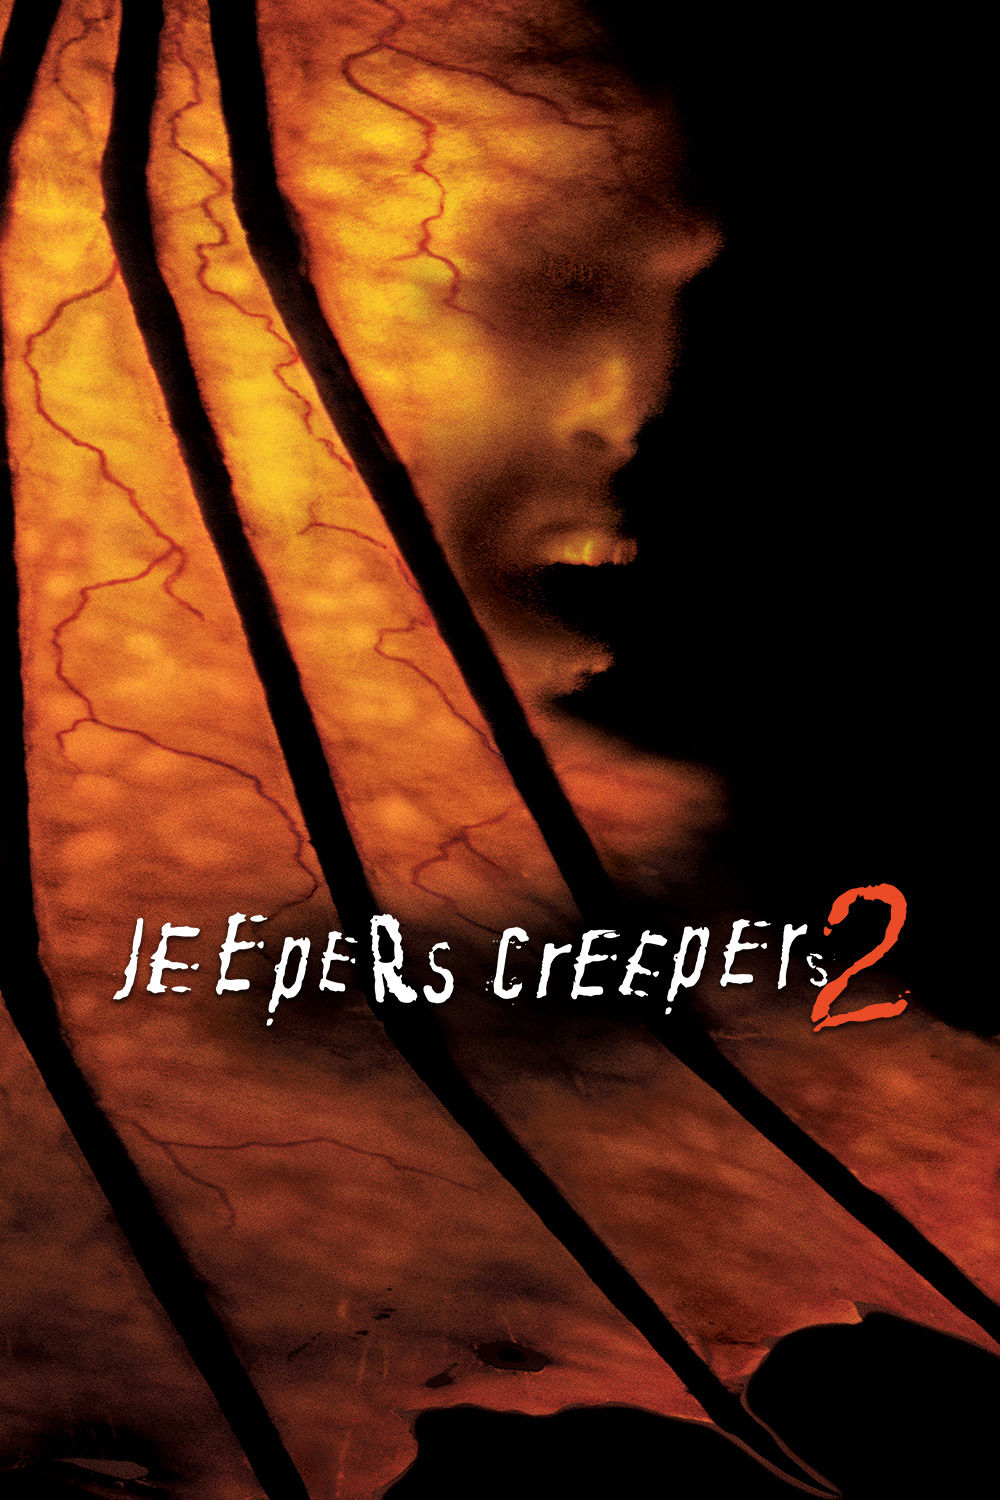 Watch Jeepers Creepers 2 Online